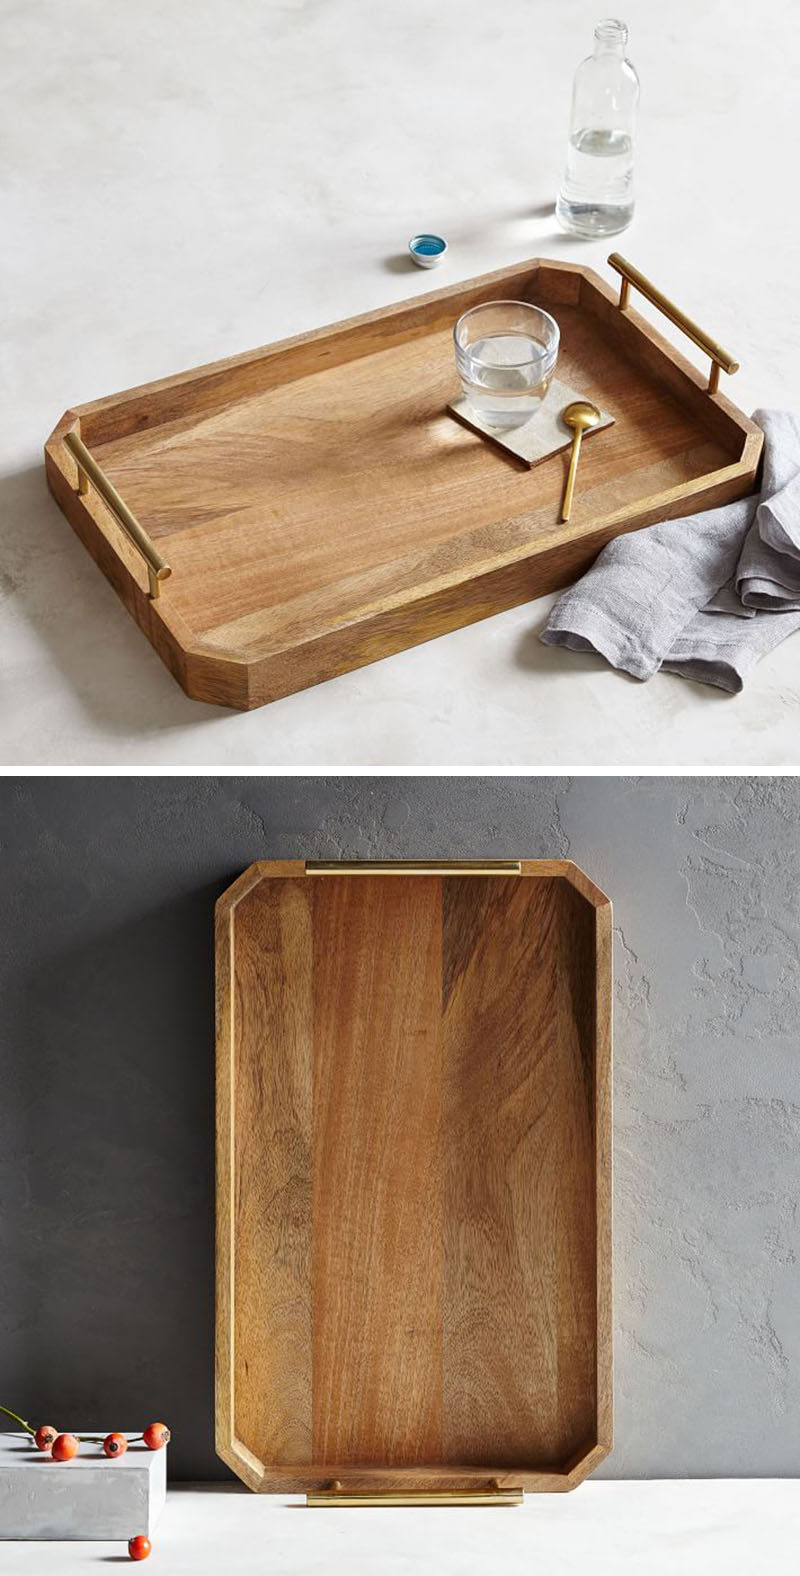 The sides of this wood tray eliminate the worry of things being knocked off, and the bar handles on both sides of the tray make it easy to transport and move when necessary.